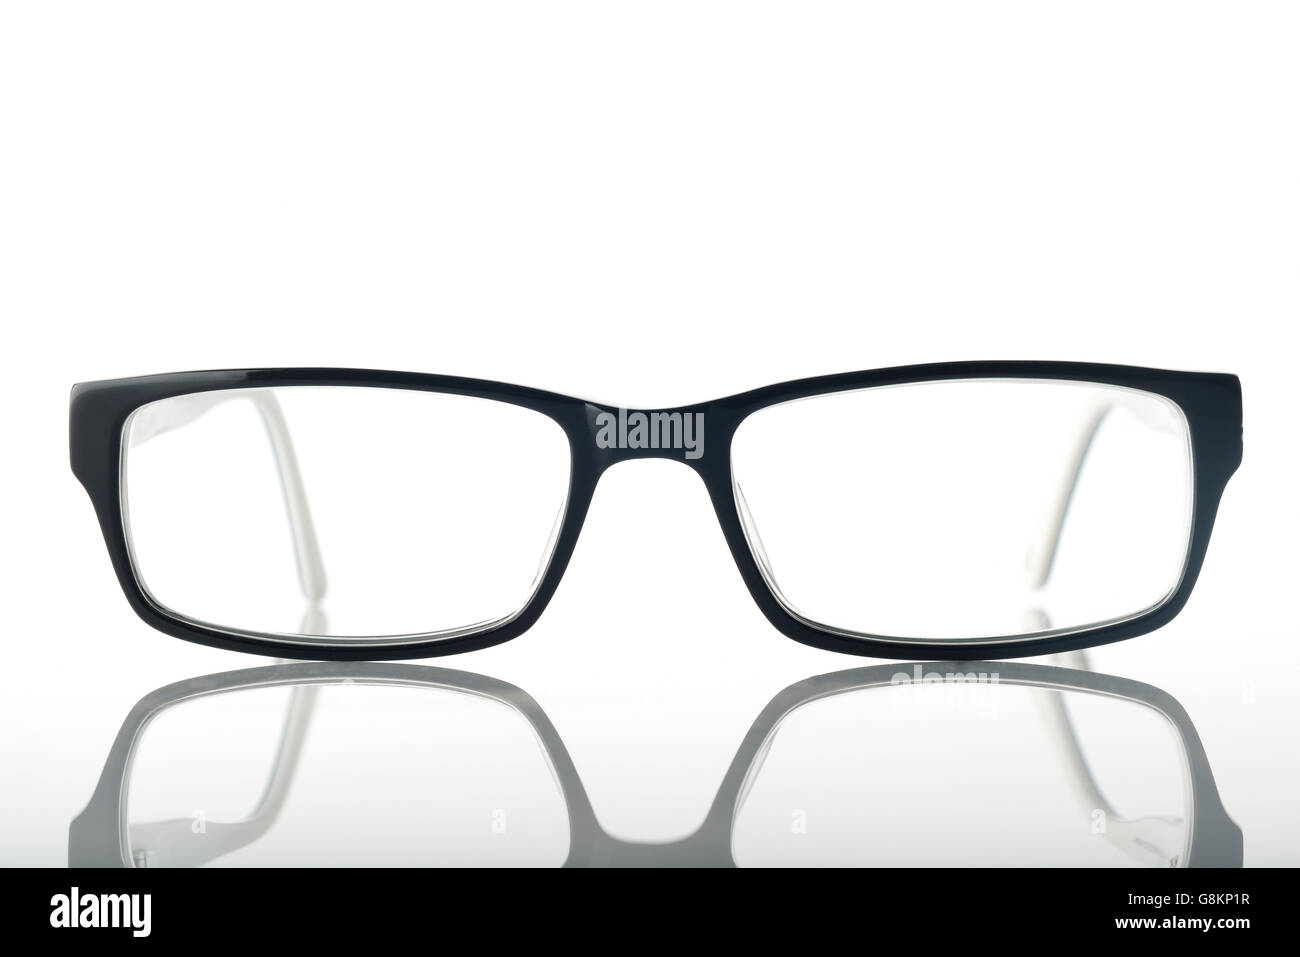 Front View of Eyeglasses Stock Photo